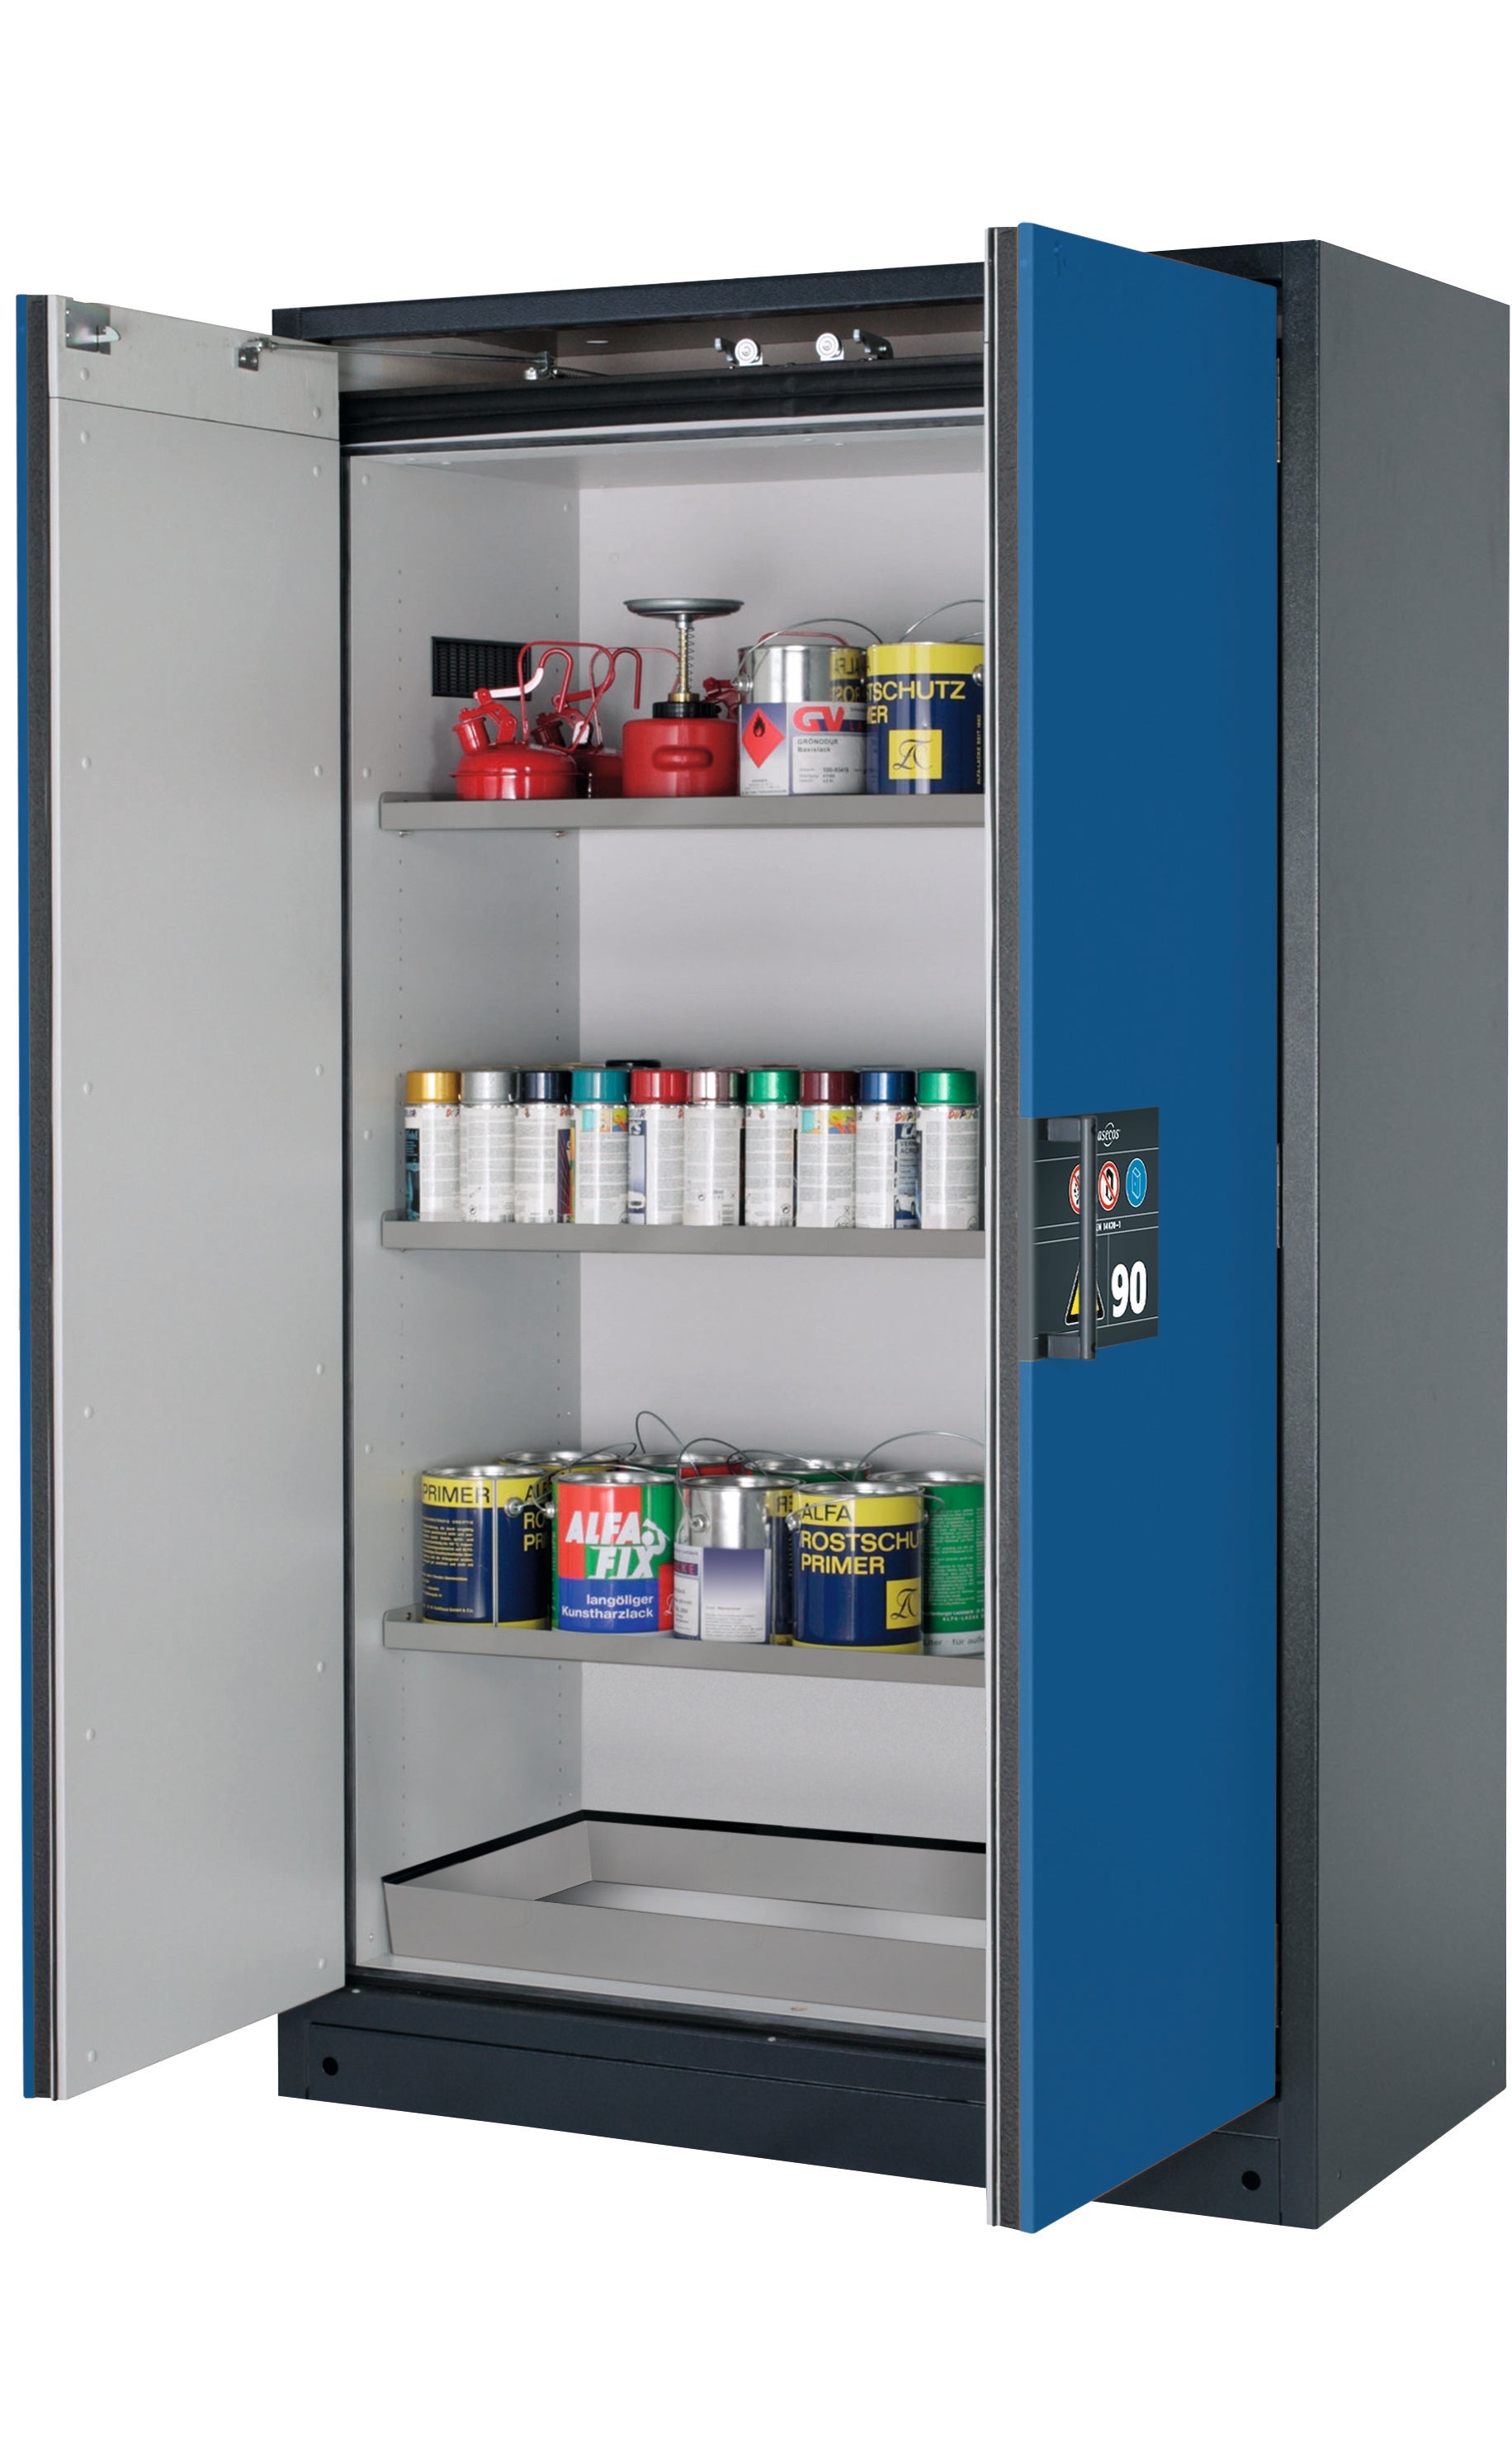 Type 90 safety storage cabinet Q-CLASSIC-90 model Q90.195.120 in gentian blue RAL 5010 with 3x shelf standard (stainless steel 1.4301),